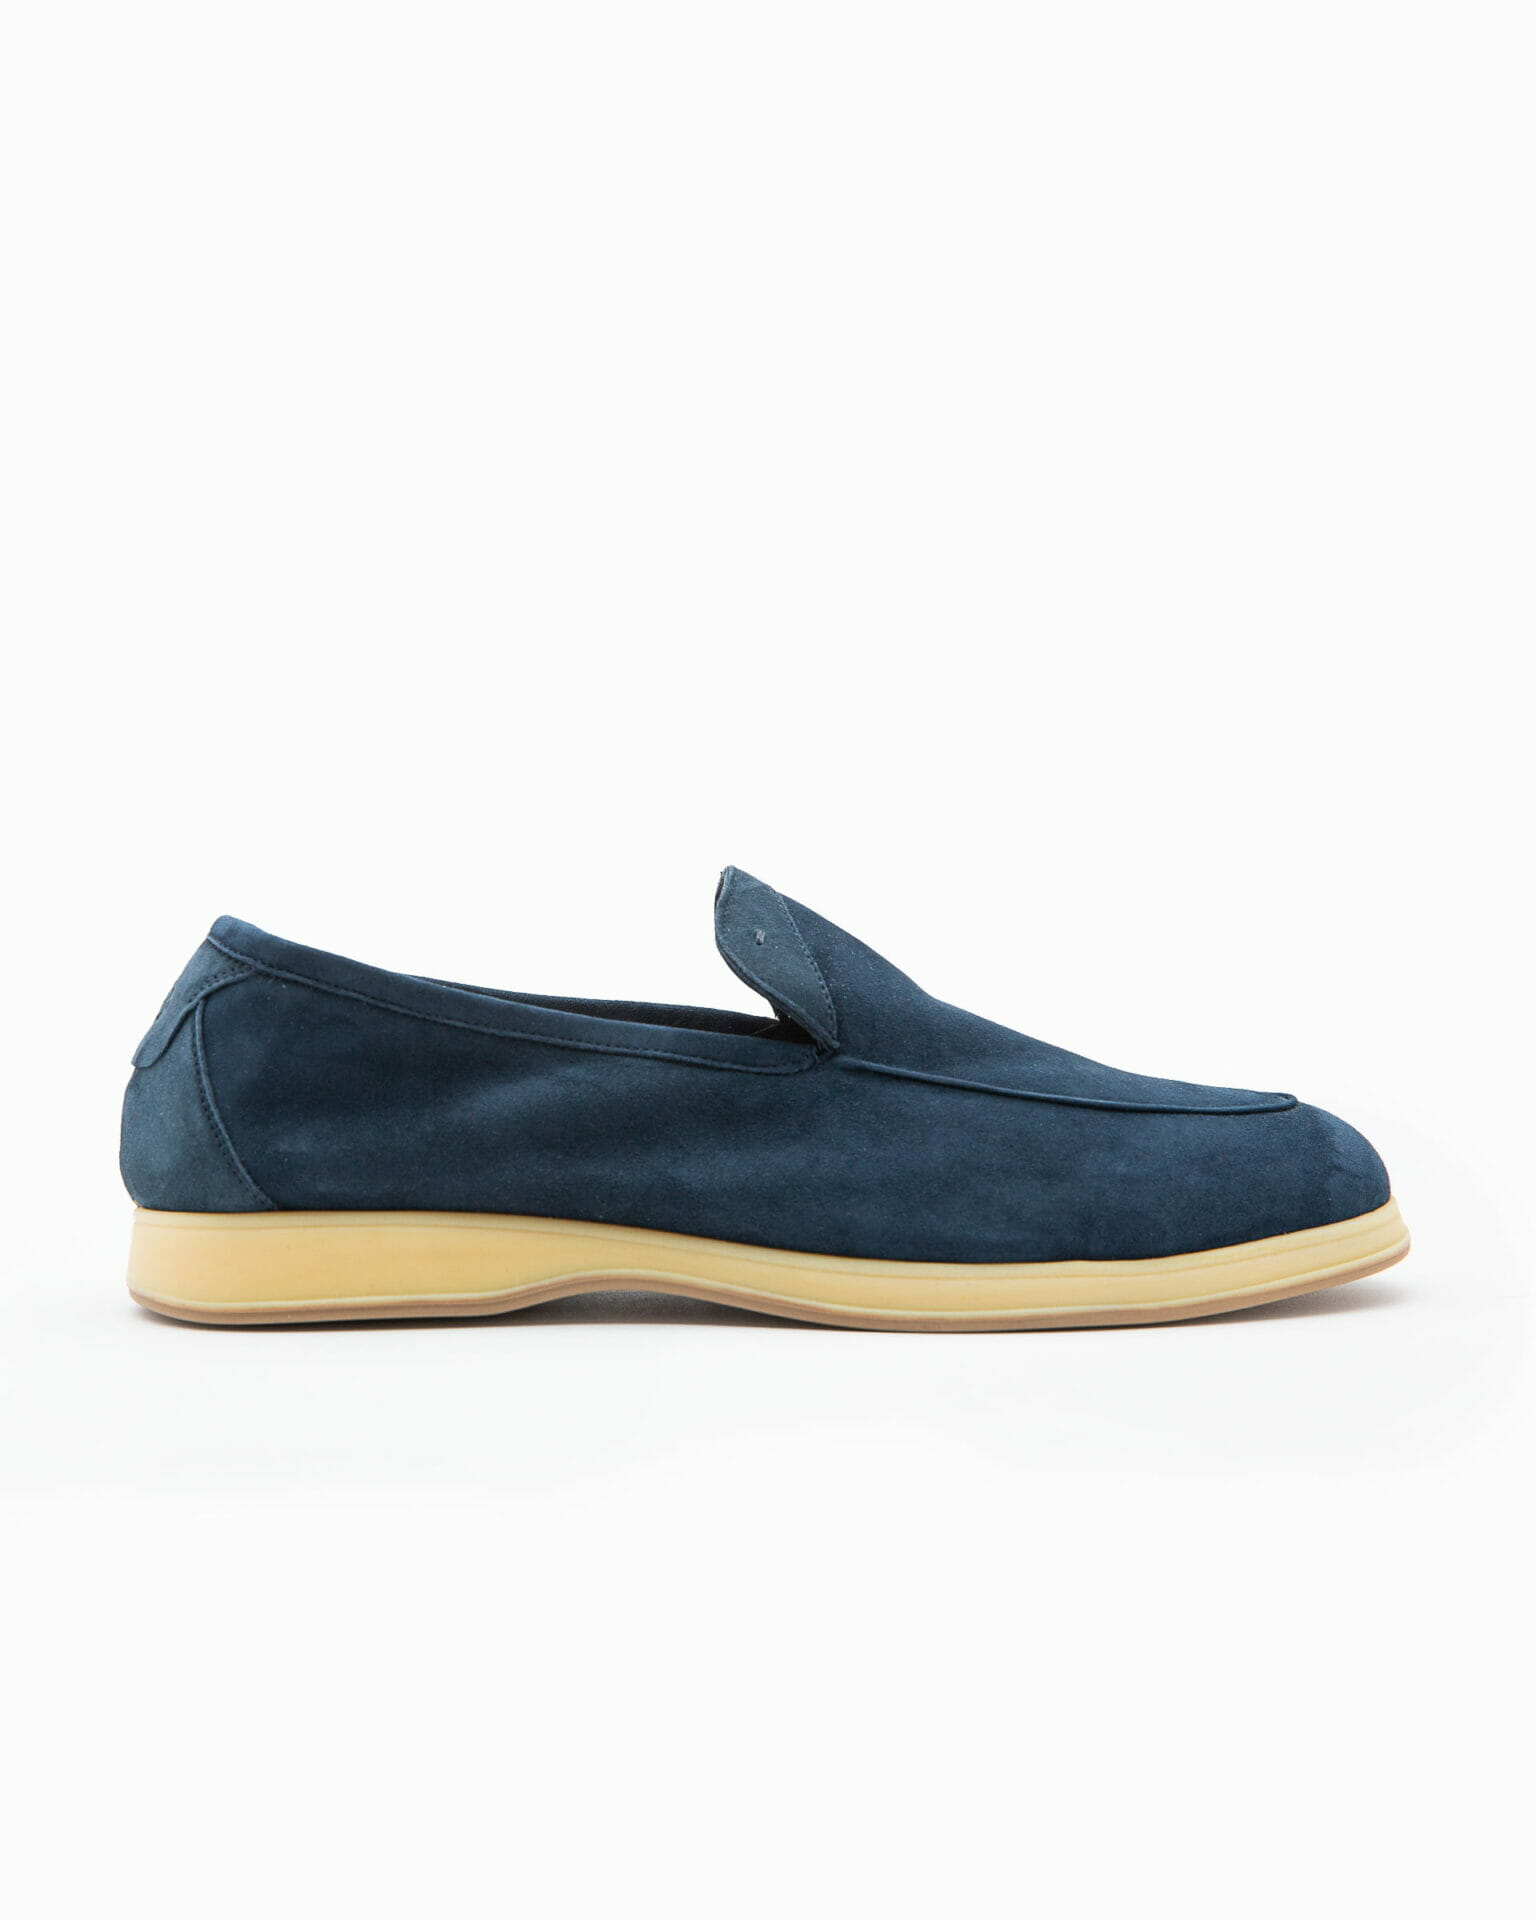 Aquariva beach blue navy suede leather loafer - Andrea Ventura Firenze